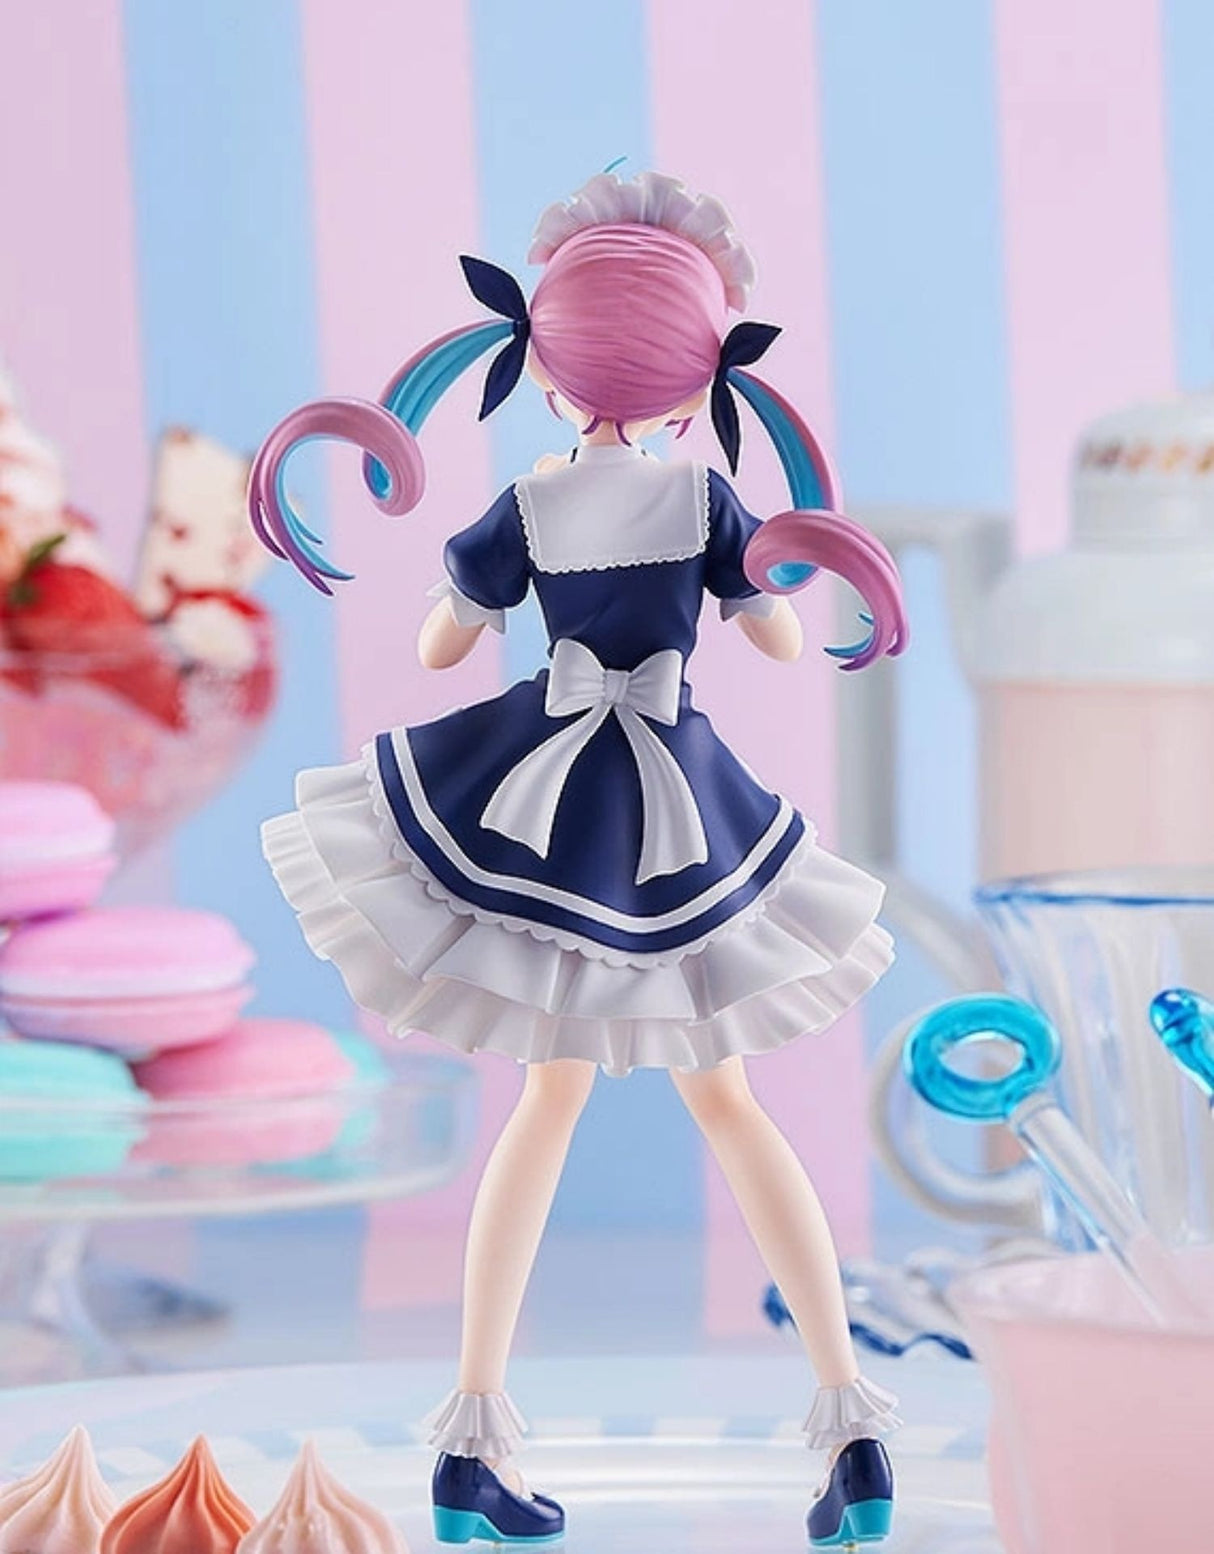 Check out Aqua's figurine, dressed in a navy-and-white sailor outfit with a sweet sailor hat. If you are looking for more Hololive Merch, We have it all! | Check out all our Anime Merch now!